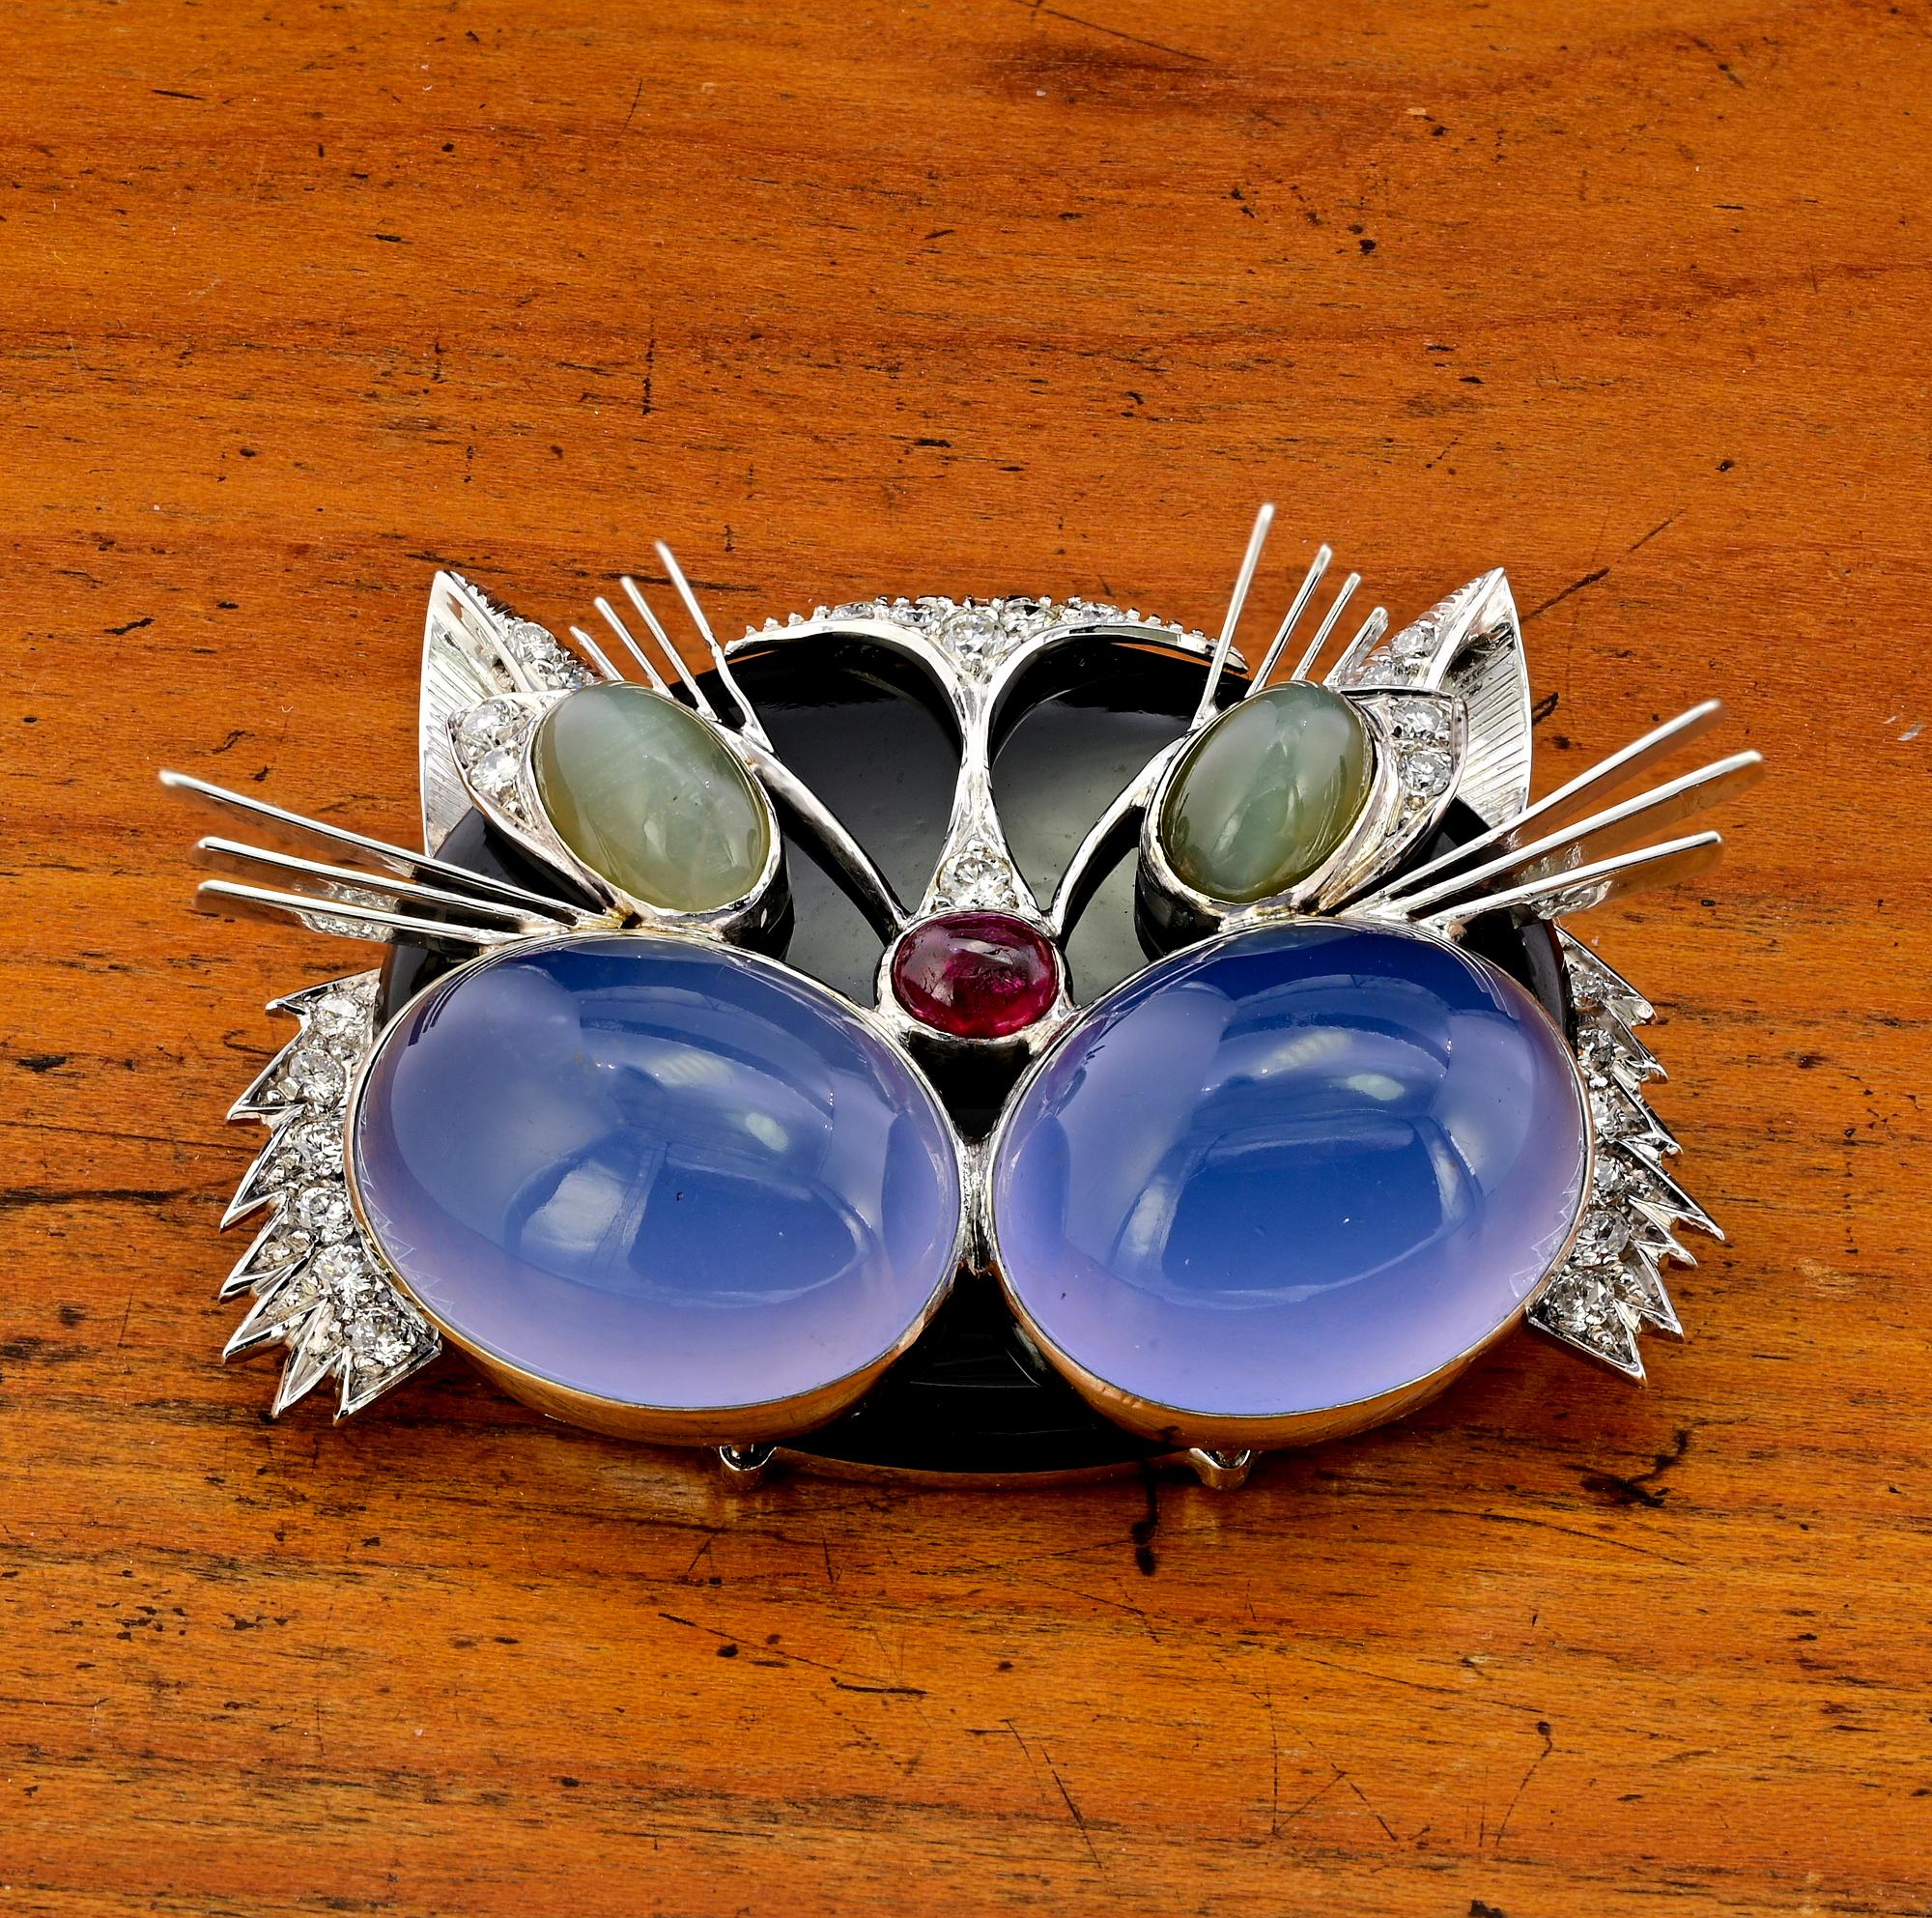 Extraordinary Fancy cat brooch pre 1970 circa- Italian origin
Hand crafted as unique piece of jewelry – no other one like this – solid 18 KT white gold
Marvelous Cut face created with amazing details of Diamond highlighting on white gold and rare